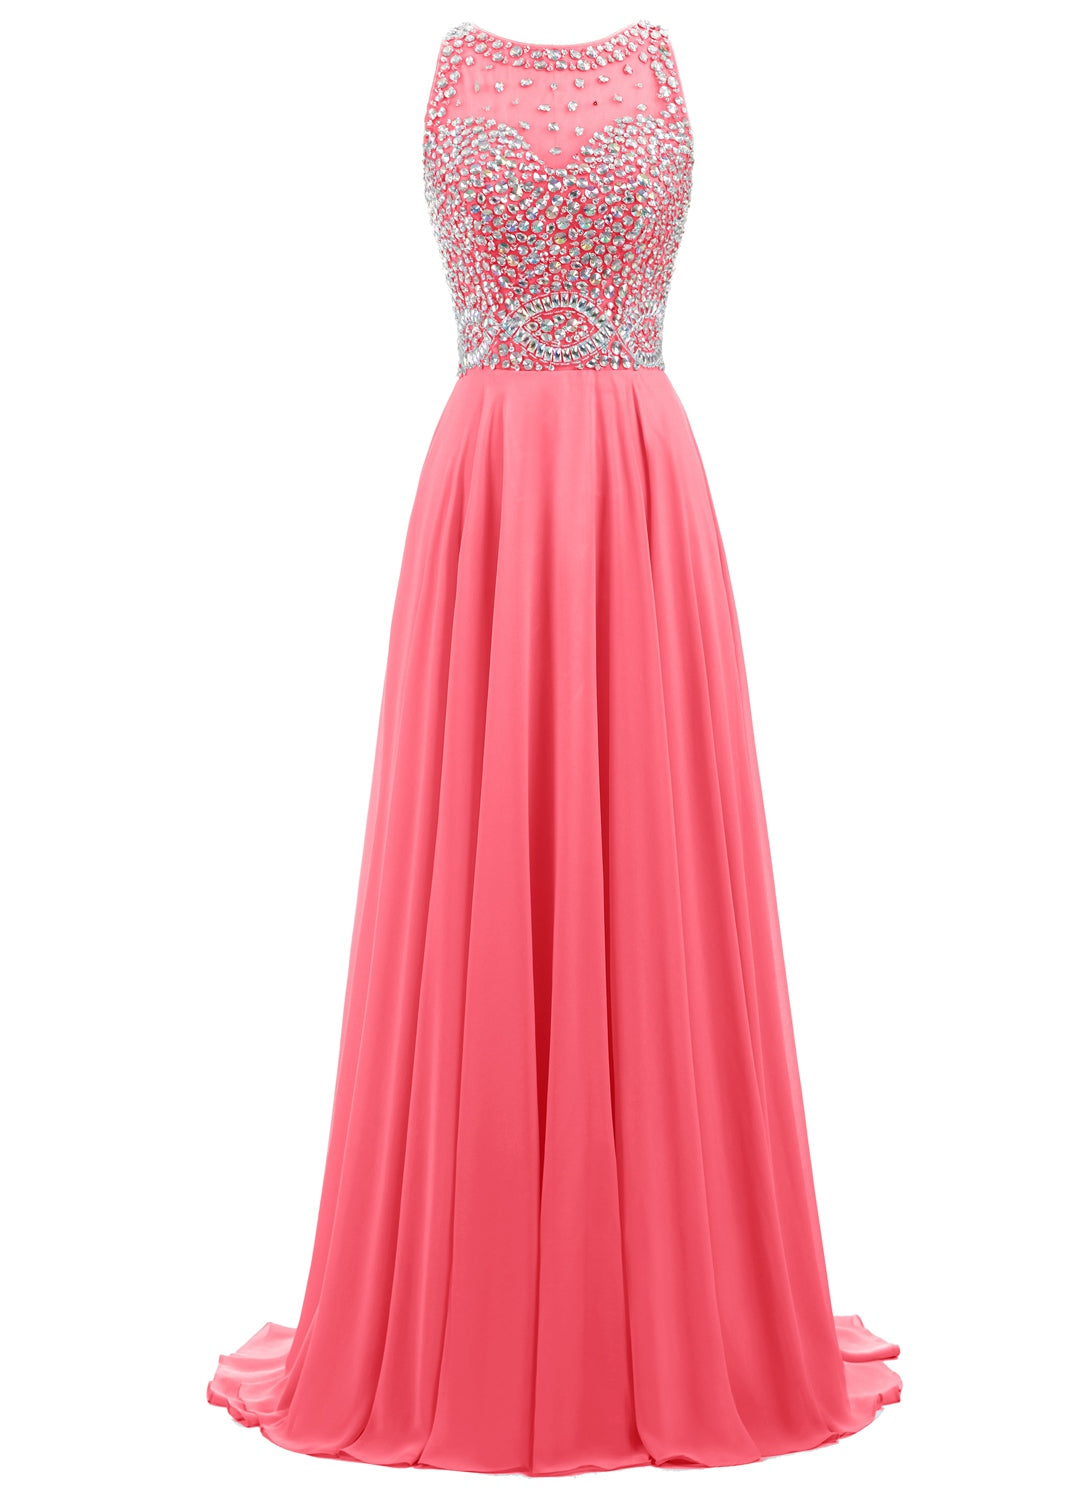 Sheer Neck Rhinestones Chiffon Long Prom Dresses / Evening Gowns with Lace-up Keyhole Back